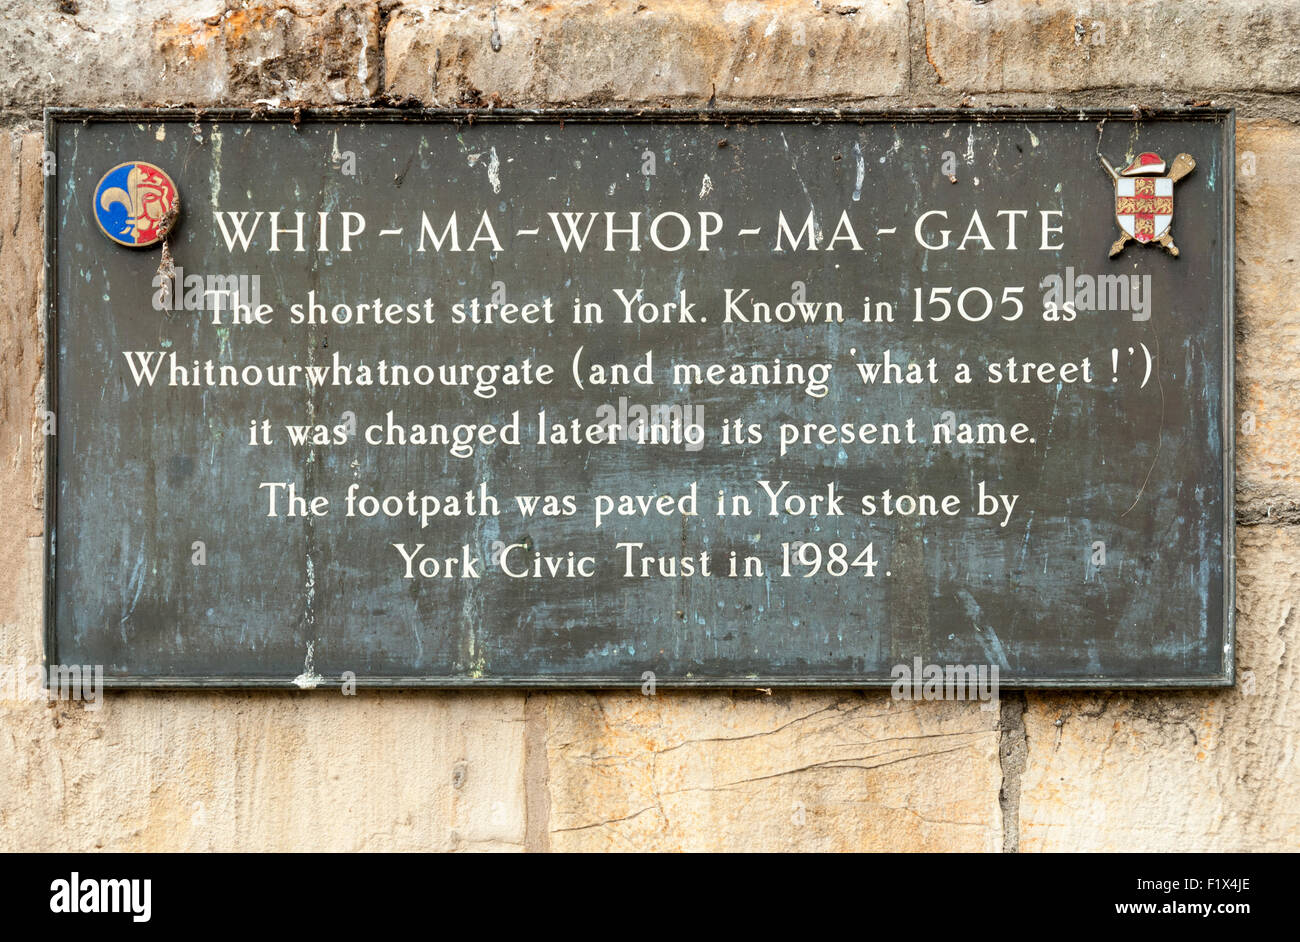 Sign at Whip-Ma-Whop-Ma-Gate, City of York, England, UK.  The shortest street in York. Stock Photo